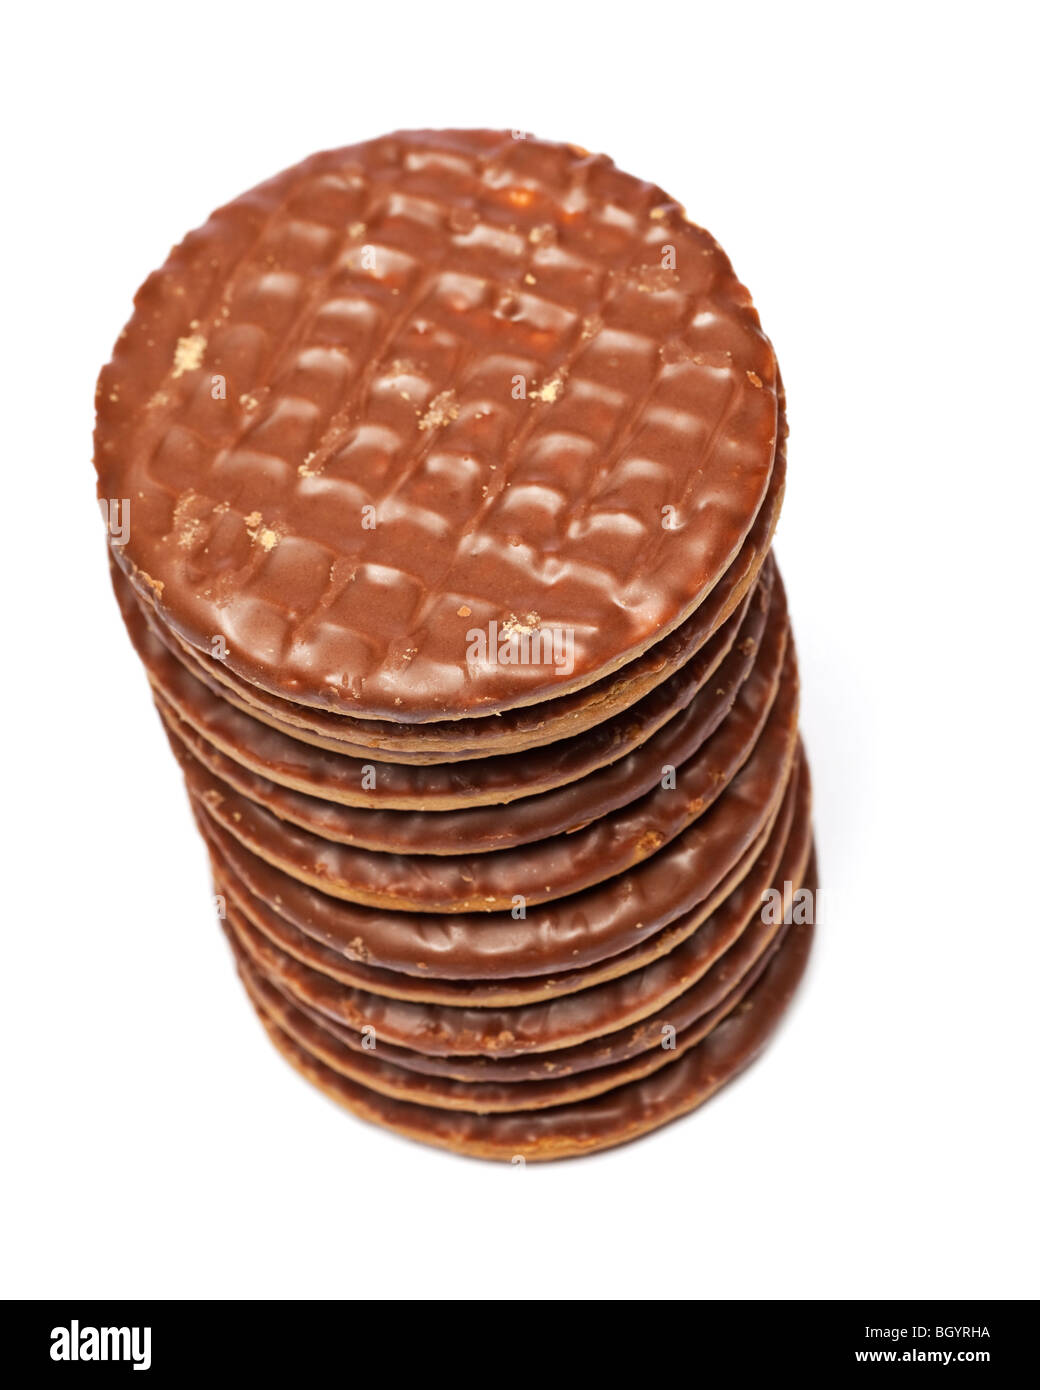 Milk chocolate digestive biscuits stack Stock Photo